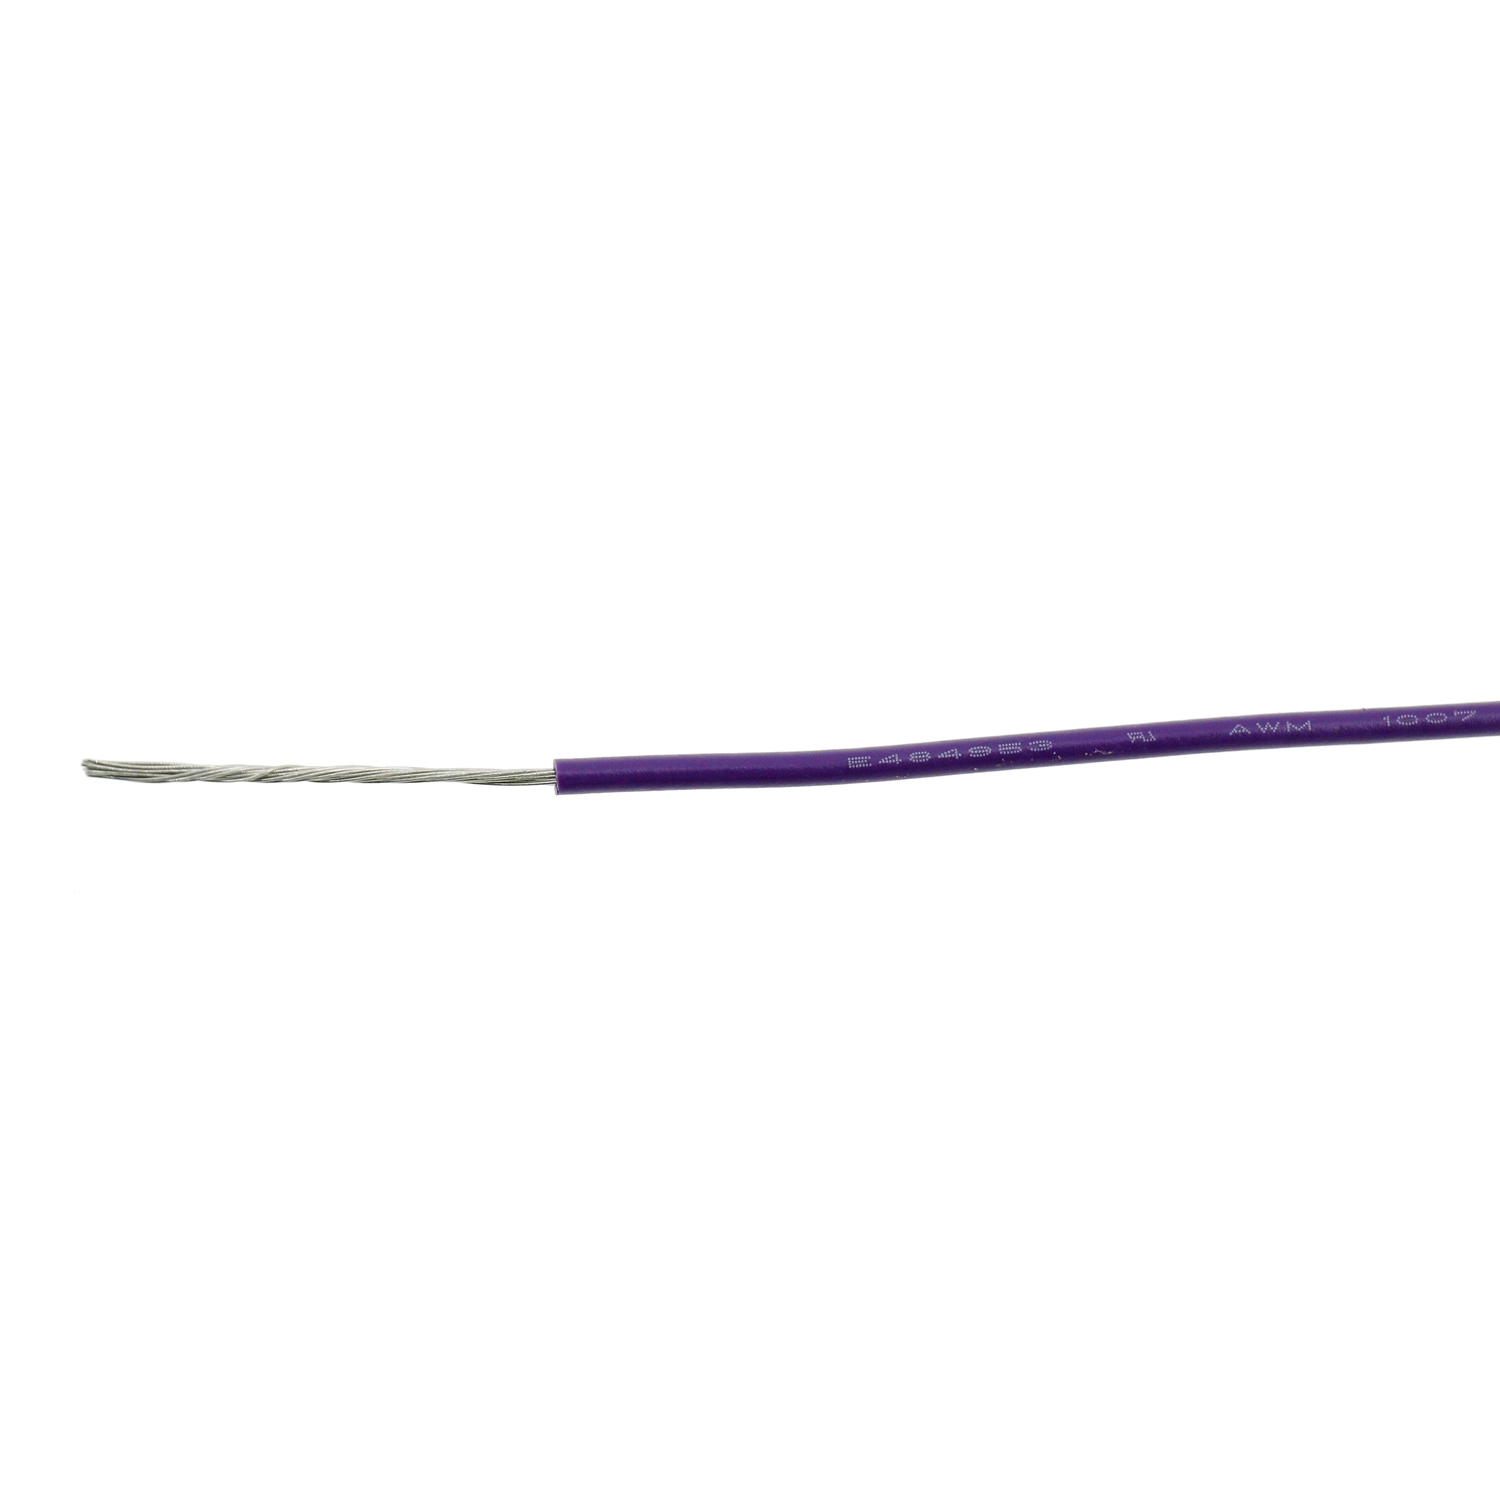 UL1007 PVC 300V Electric Hookup Wire for Internal Wiring 